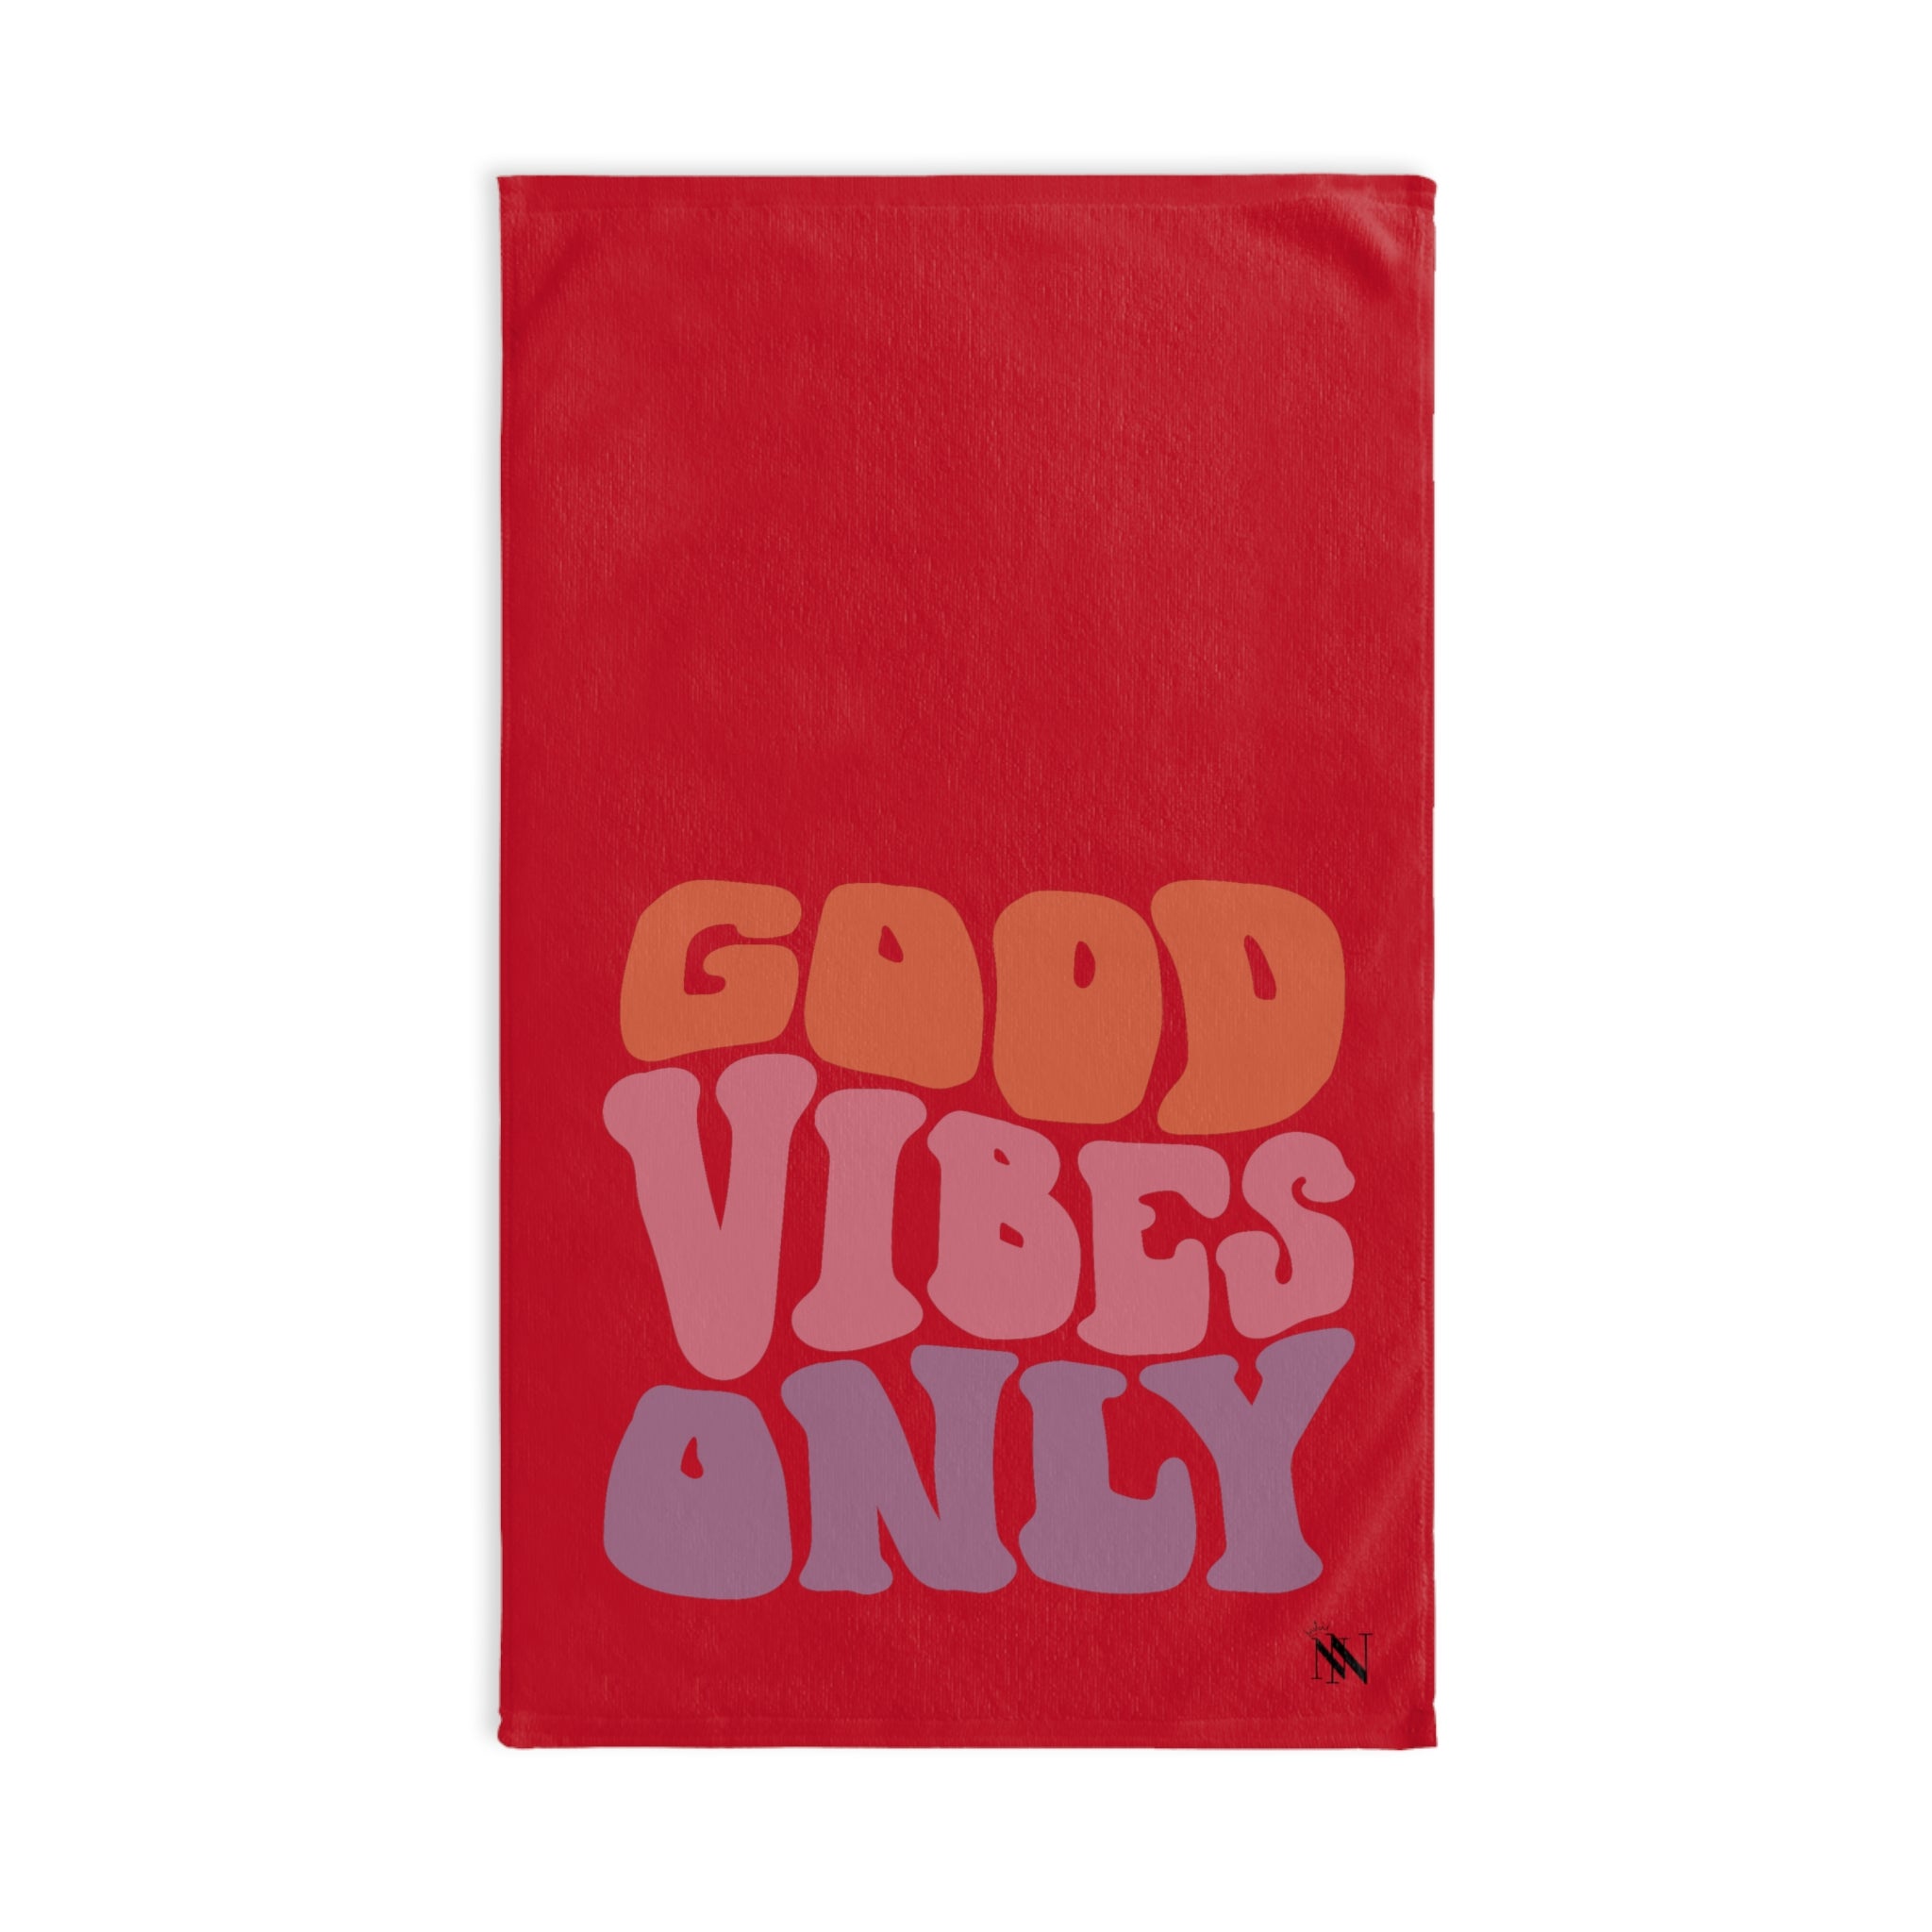 Only Vibes Good Red | Sexy Gifts for Boyfriend, Funny Towel Romantic Gift for Wedding Couple Fiance First Year 2nd Anniversary Valentines, Party Gag Gifts, Joke Humor Cloth for Husband Men BF NECTAR NAPKINS